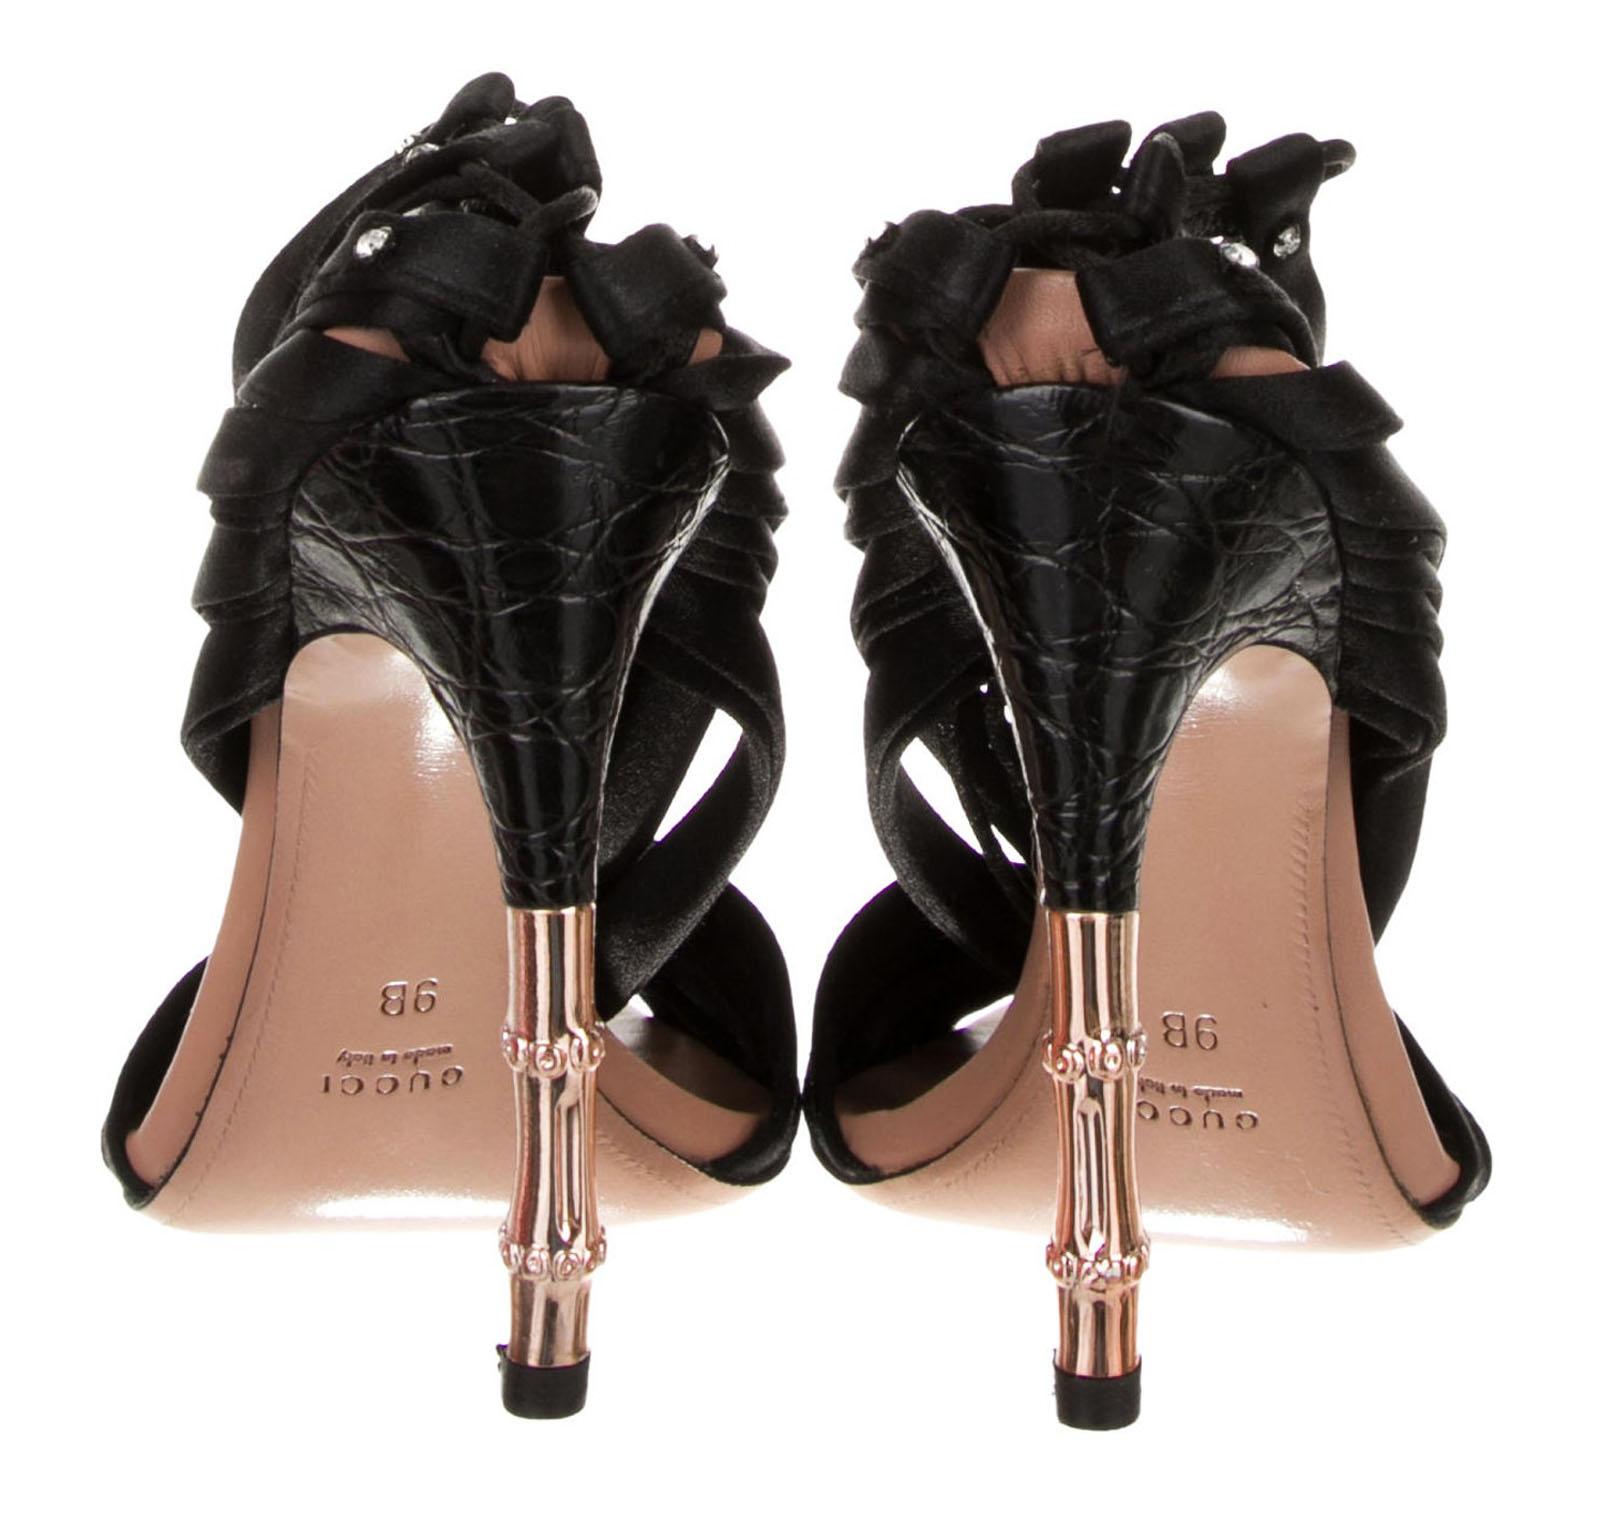 Highly Collectible GUCCI Pair from TOM FORD'S Era
THE HOLY GRAIL OF ALL GUCCI SHOES!!!
S/S 2004 Collection
Designer Size - 9 B
Color - Black, Crocodile and Bamboo Metallic Heel - 4